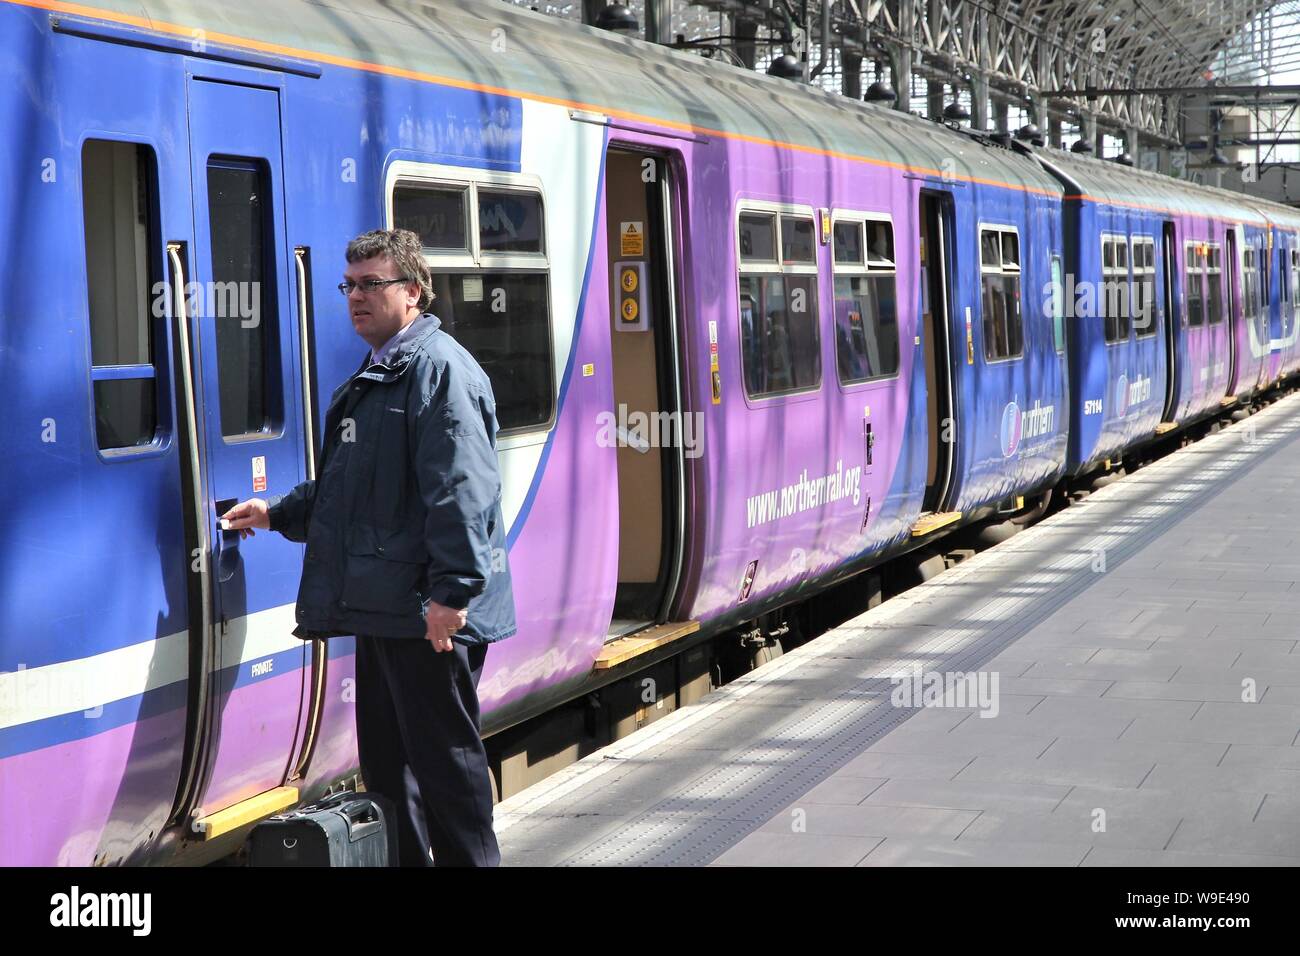 MANCHESTER, UK - APRIL 23, 2013: Worker boards Northern Rail train in Manchester, UK. NR is part of Serco-Abellio joint venture. NR has fleet of 313 t Stock Photo